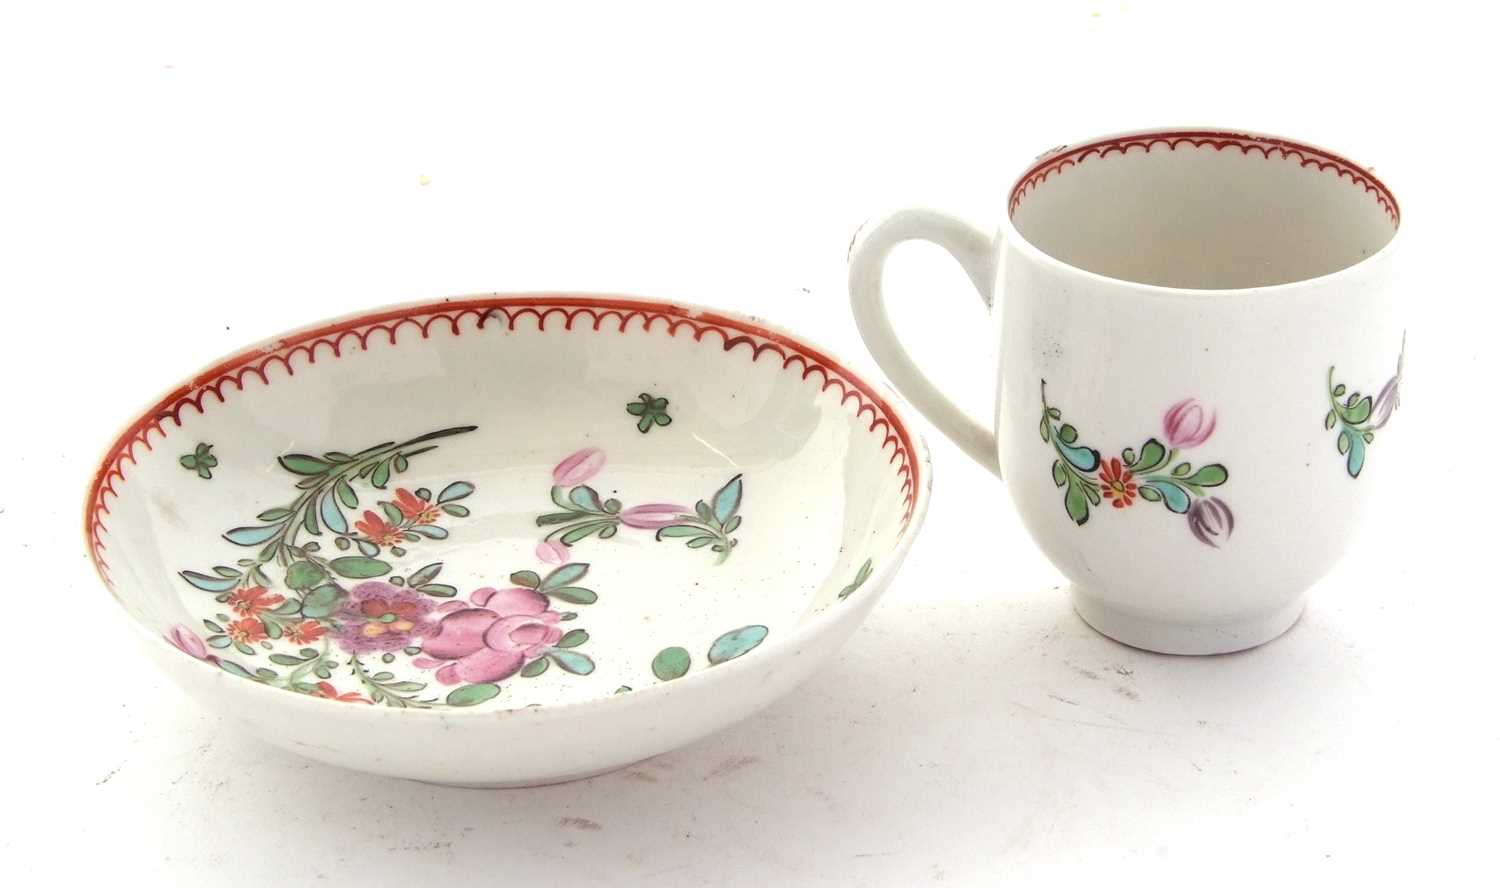 A Lowestoft porcelain cup and saucer circa 1770 with polychrome designs of flowers in Curtis - Image 3 of 4